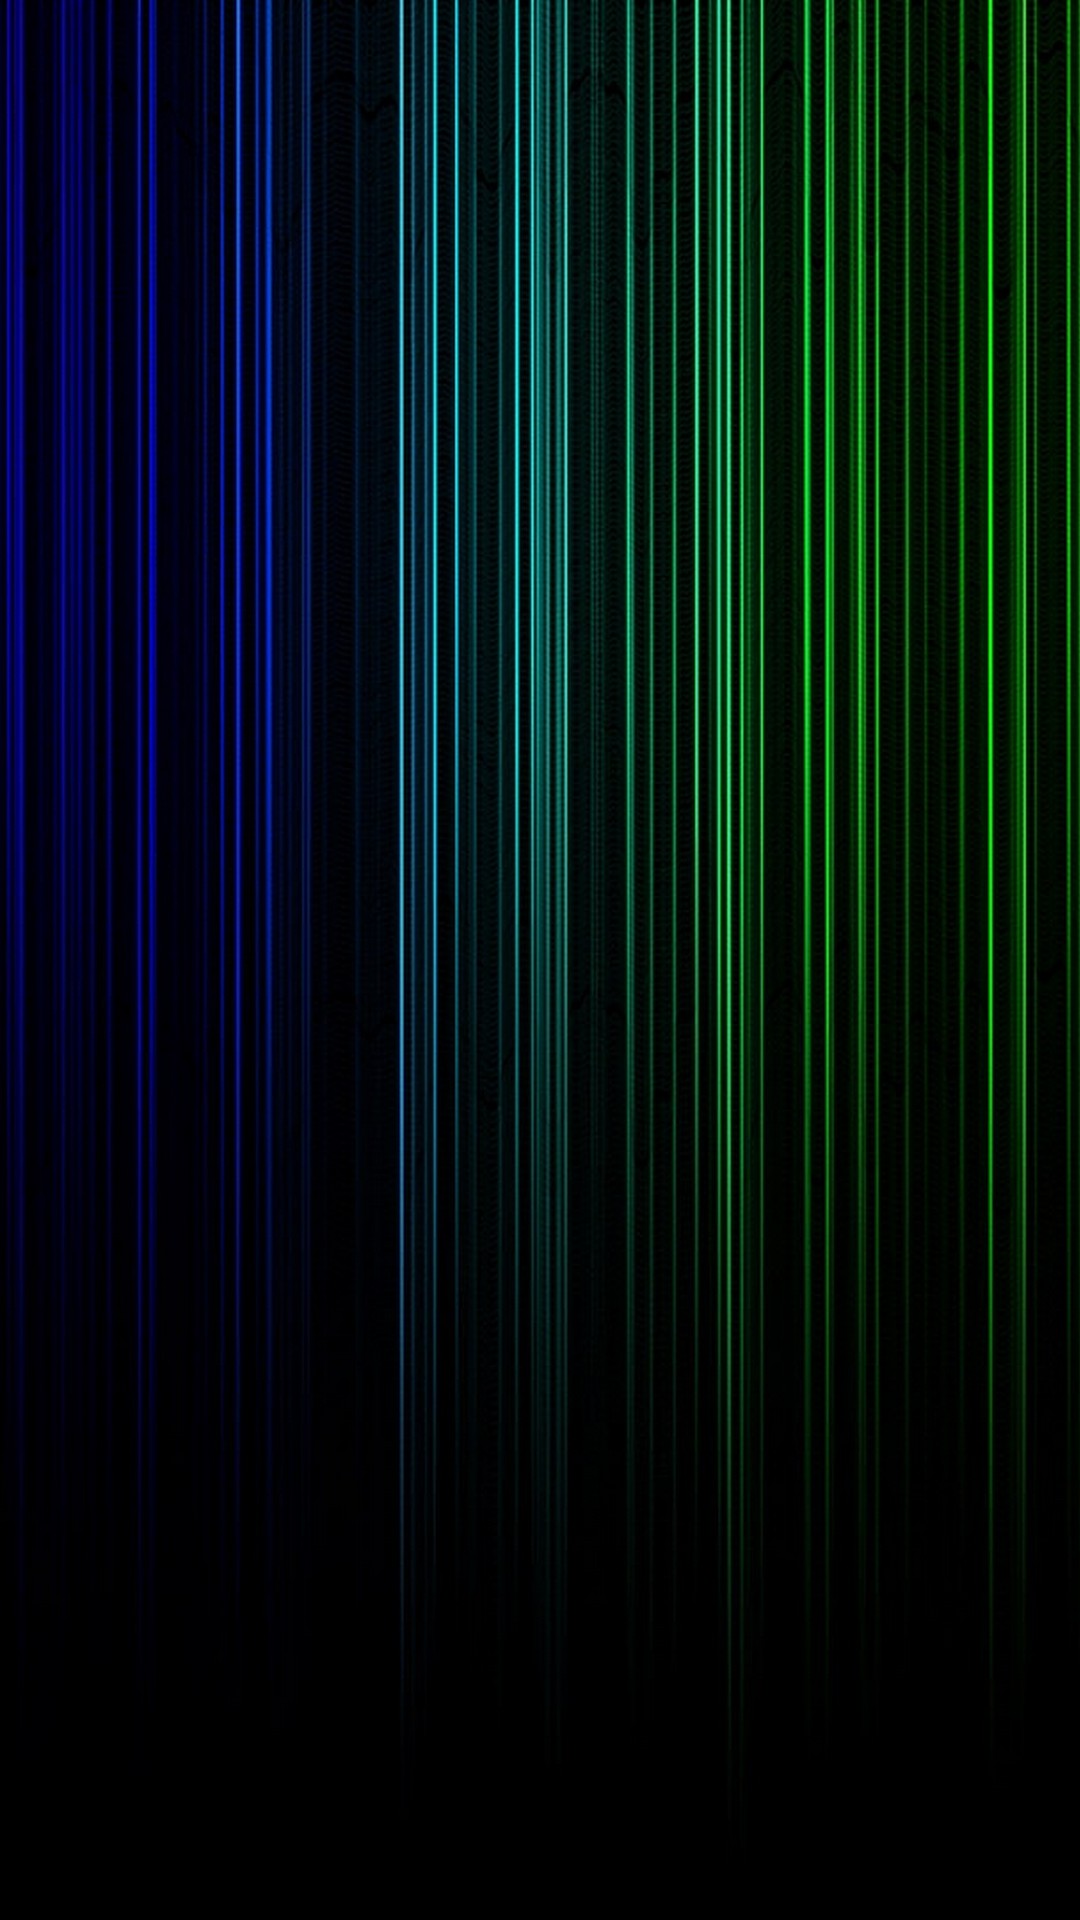 Rainbow Colors iPhone Wallpaper with image resolution 1080x1920 pixel. You can make this wallpaper for your iPhone 5, 6, 7, 8, X backgrounds, Mobile Screensaver, or iPad Lock Screen